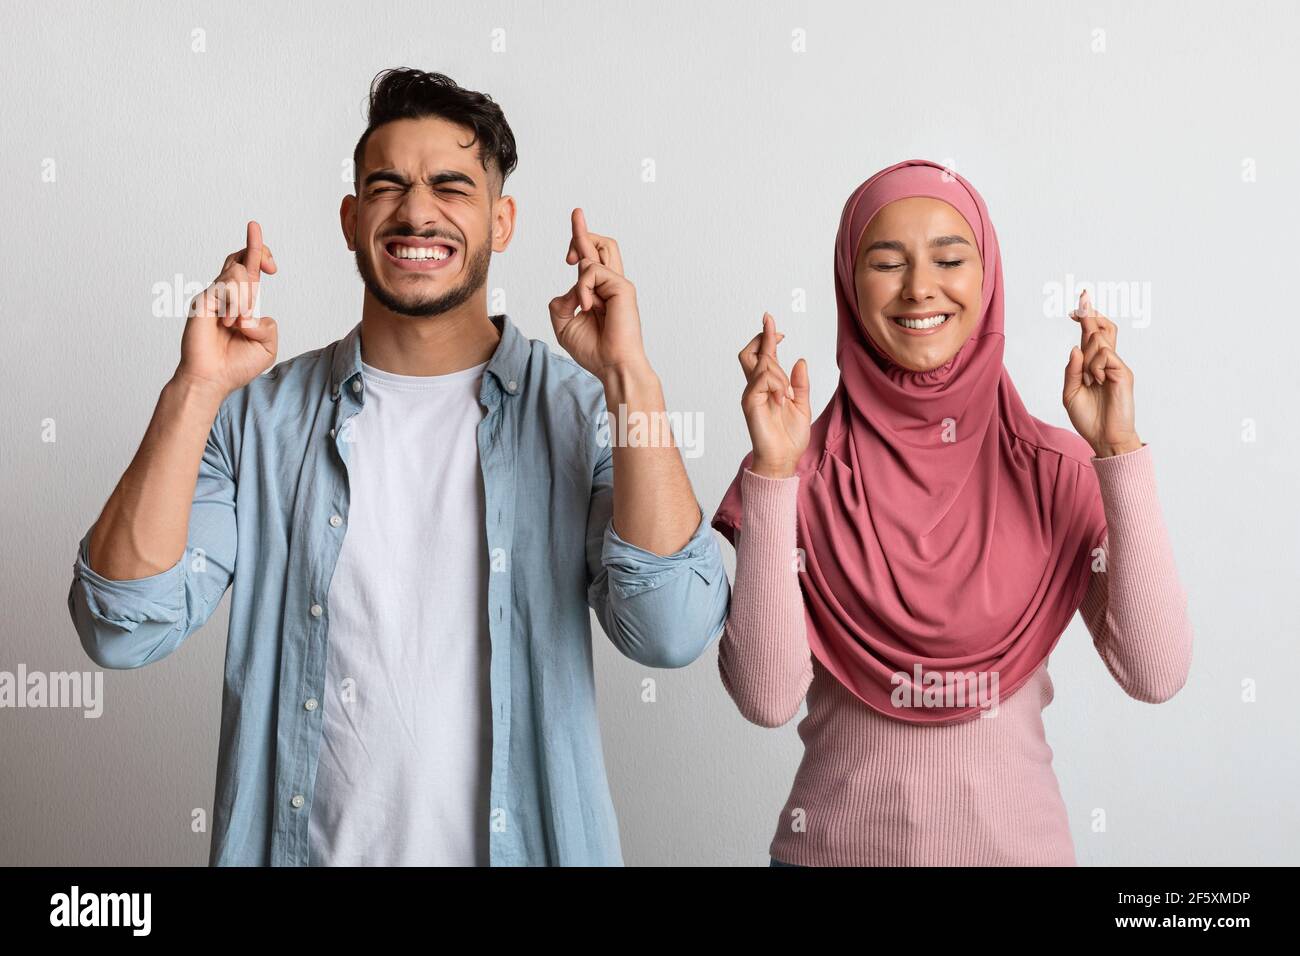 Making Wish. Superstitious muslim couple crossing fingers for luck with closed eyes Stock Photo